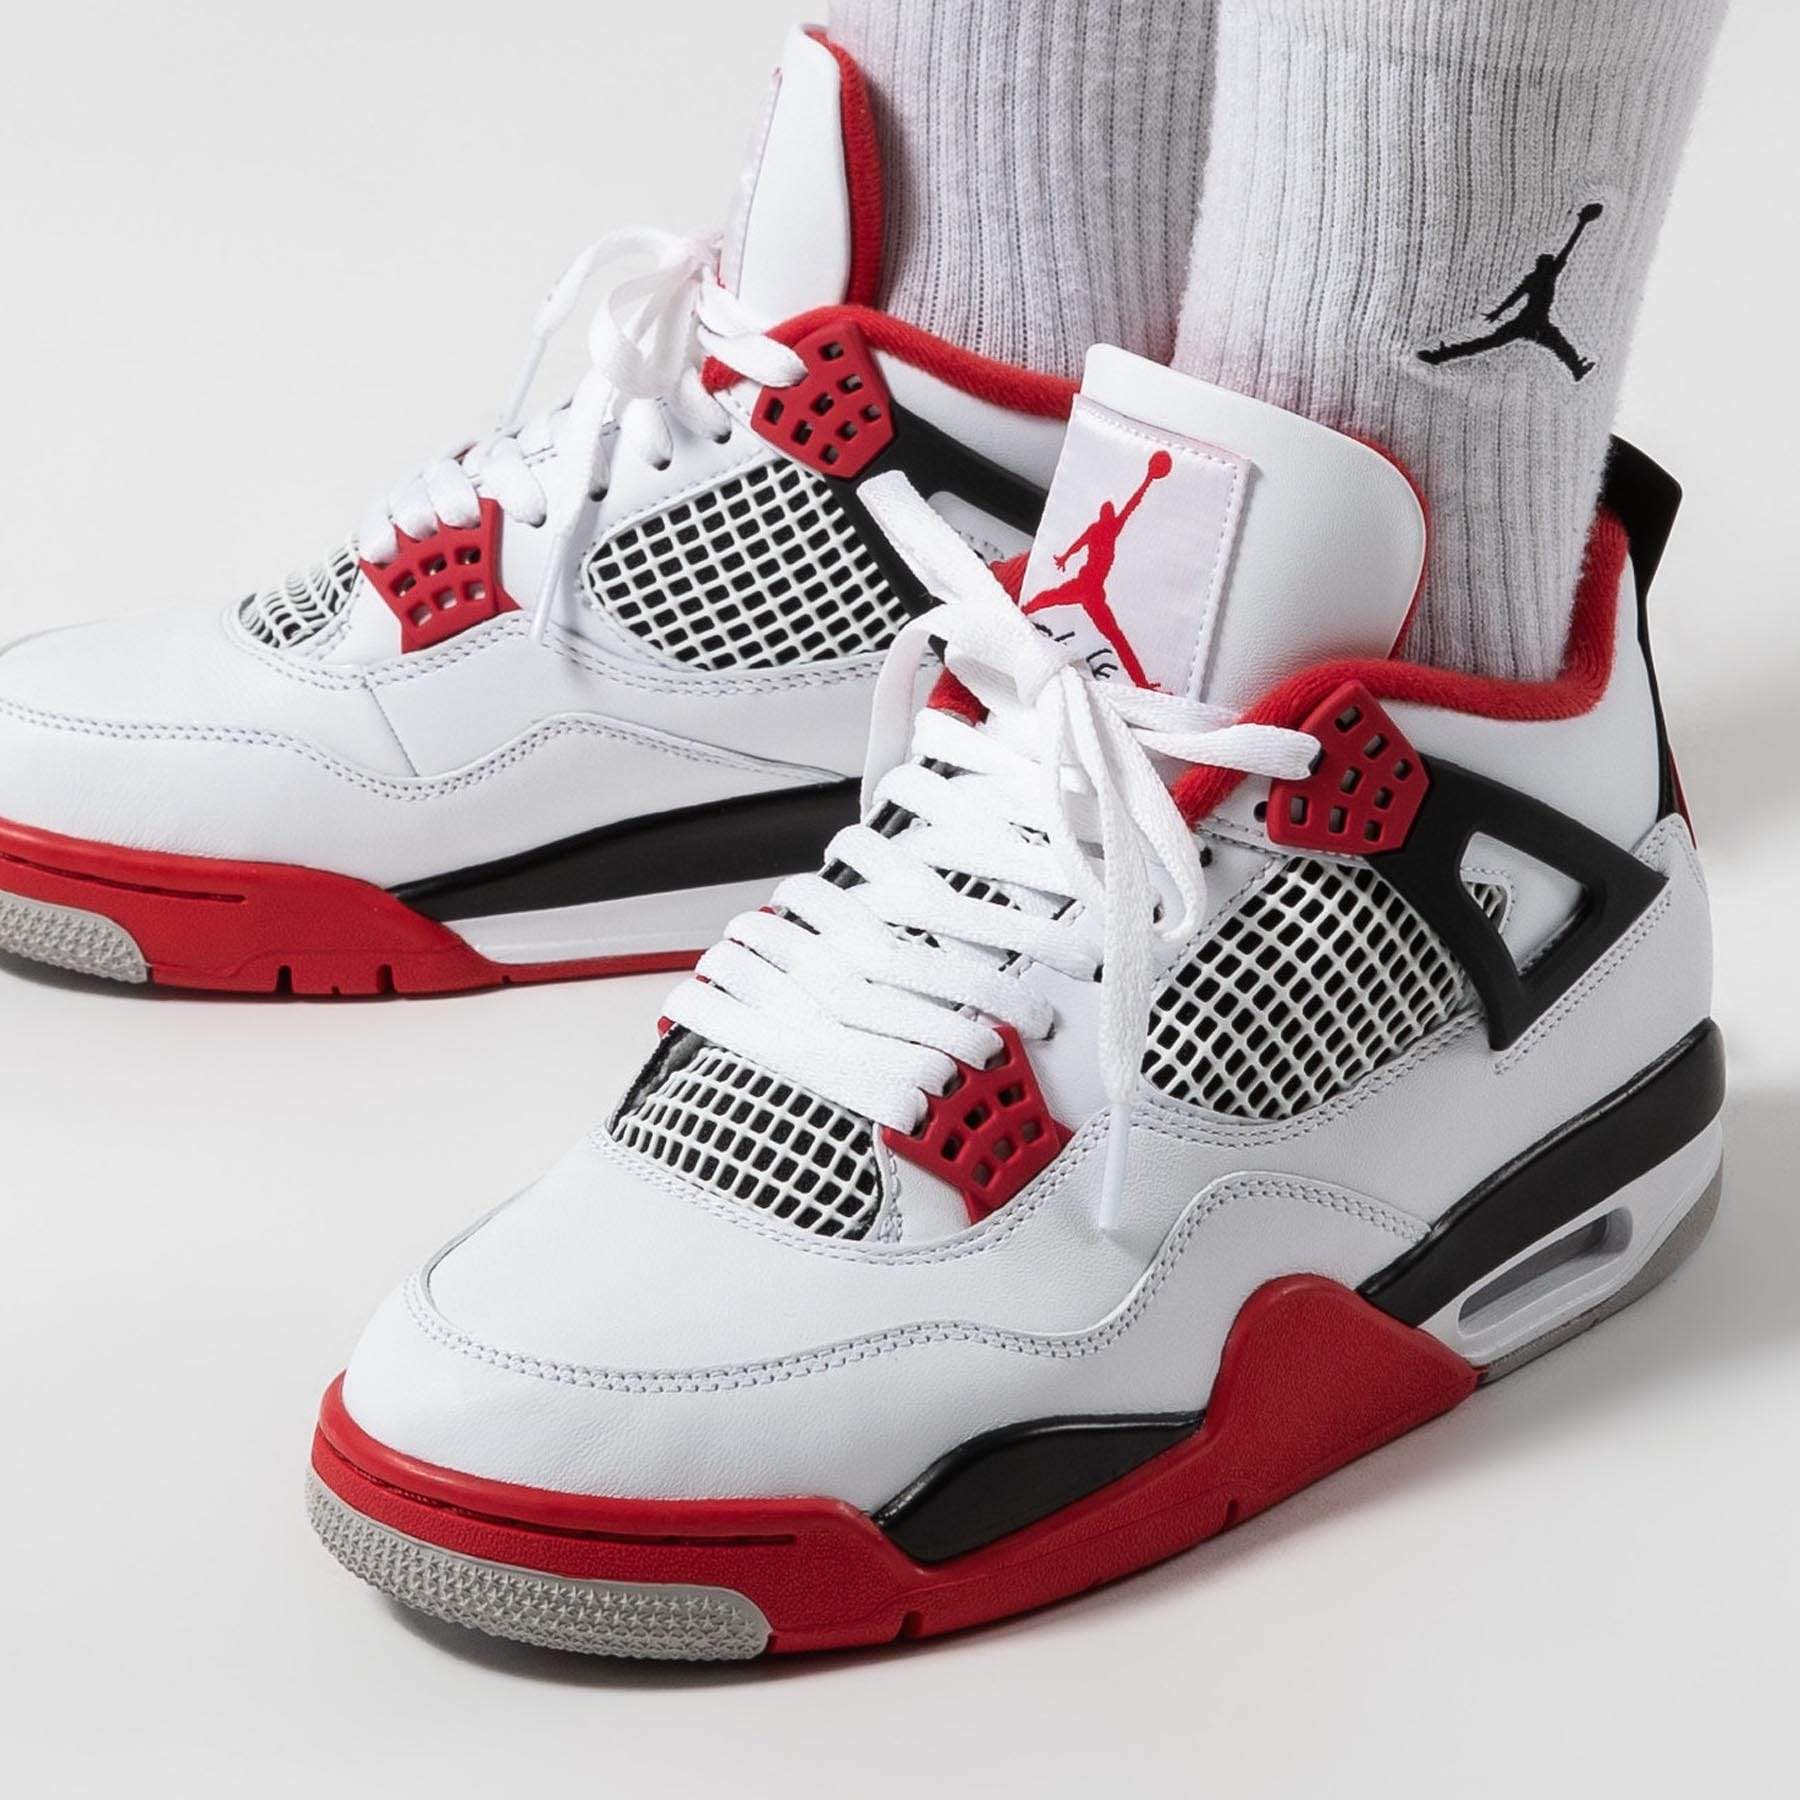 red fire 4s